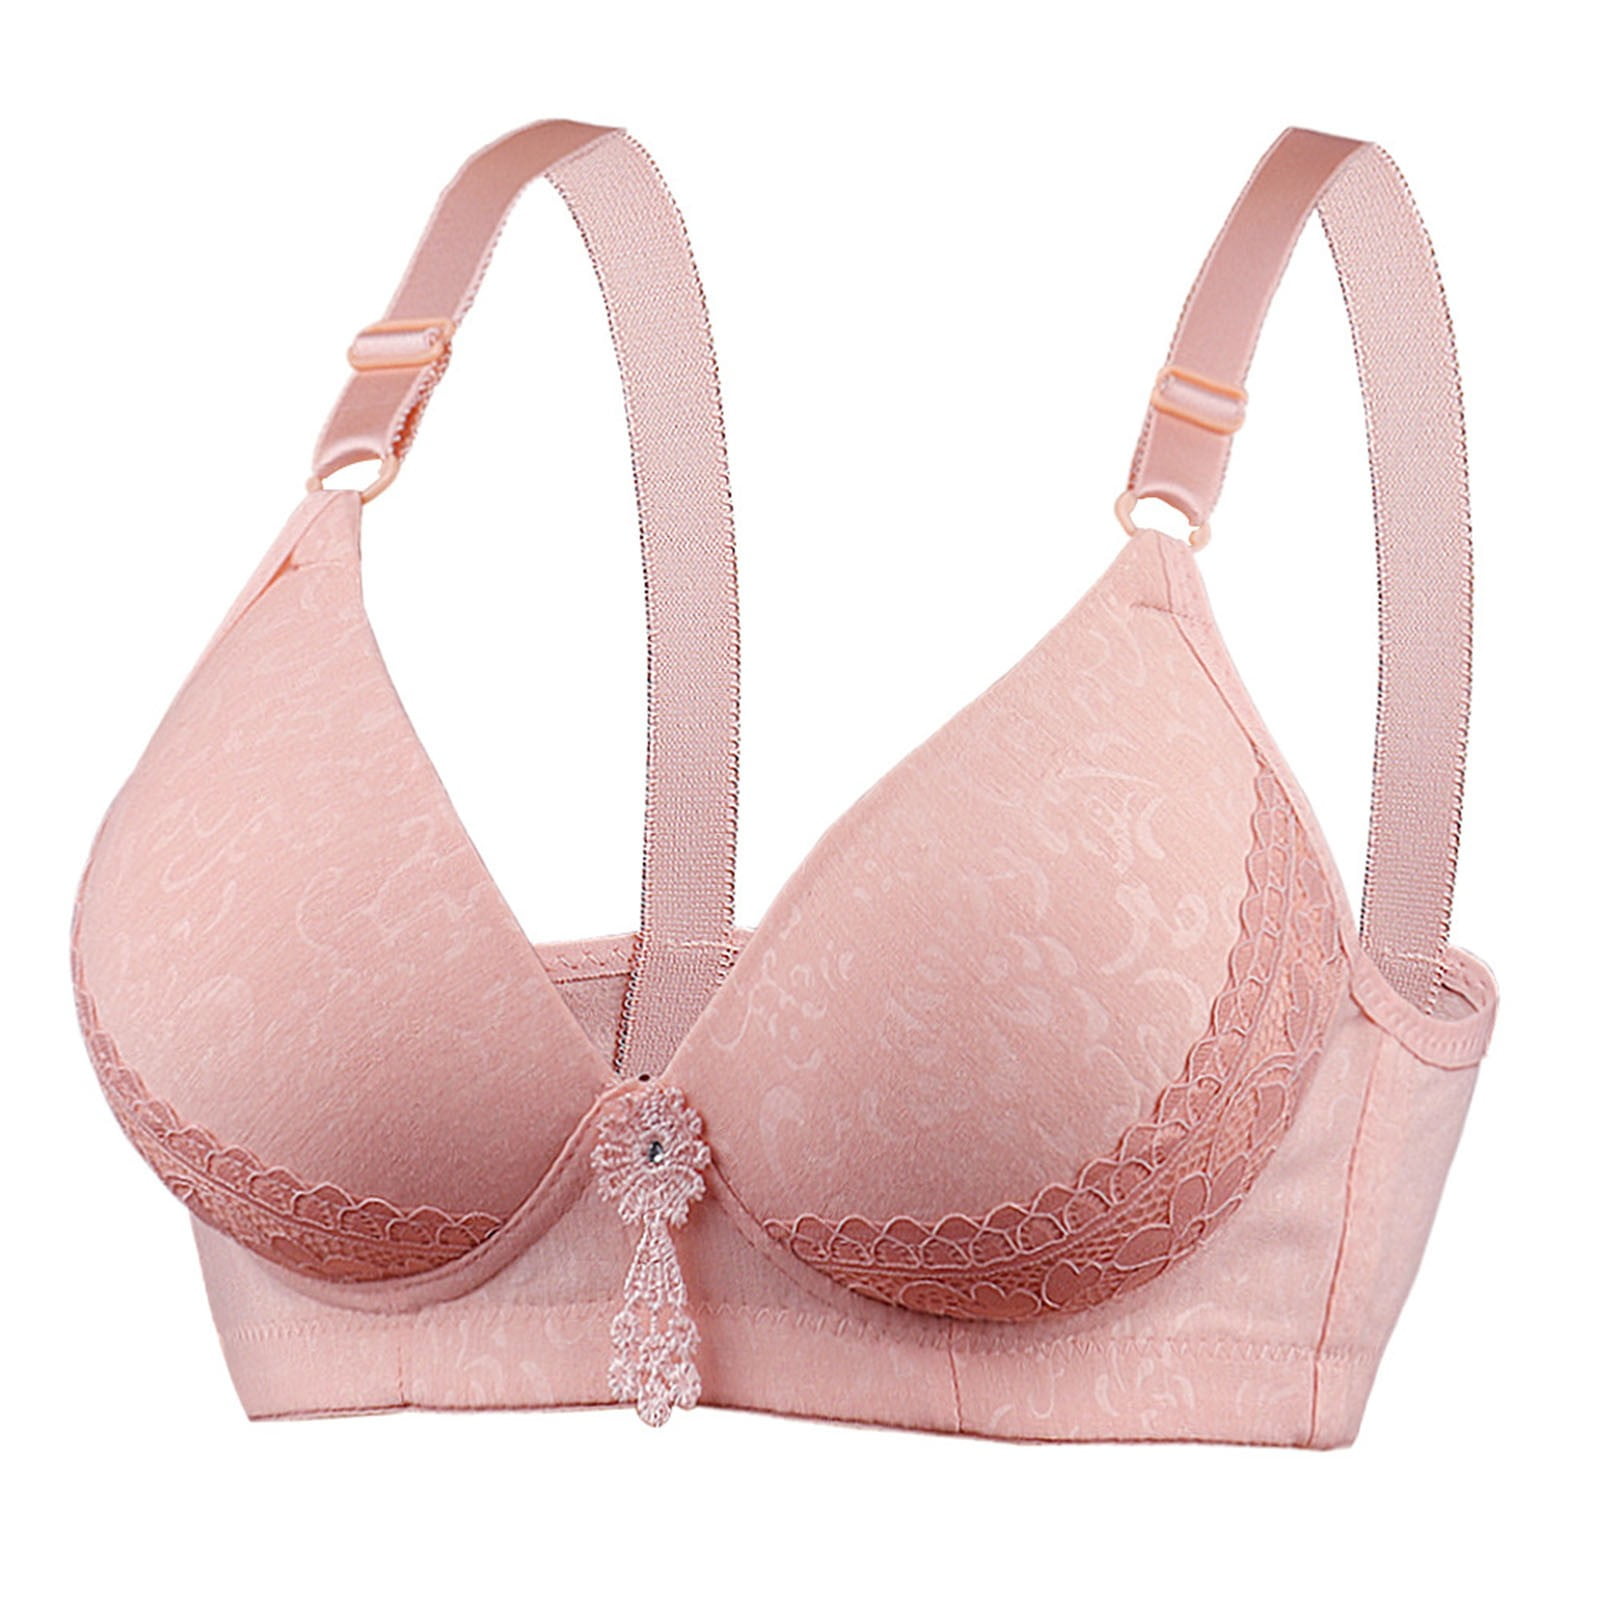 Backless Bras for Women, Women's Comfortable Lace Breathable Bra